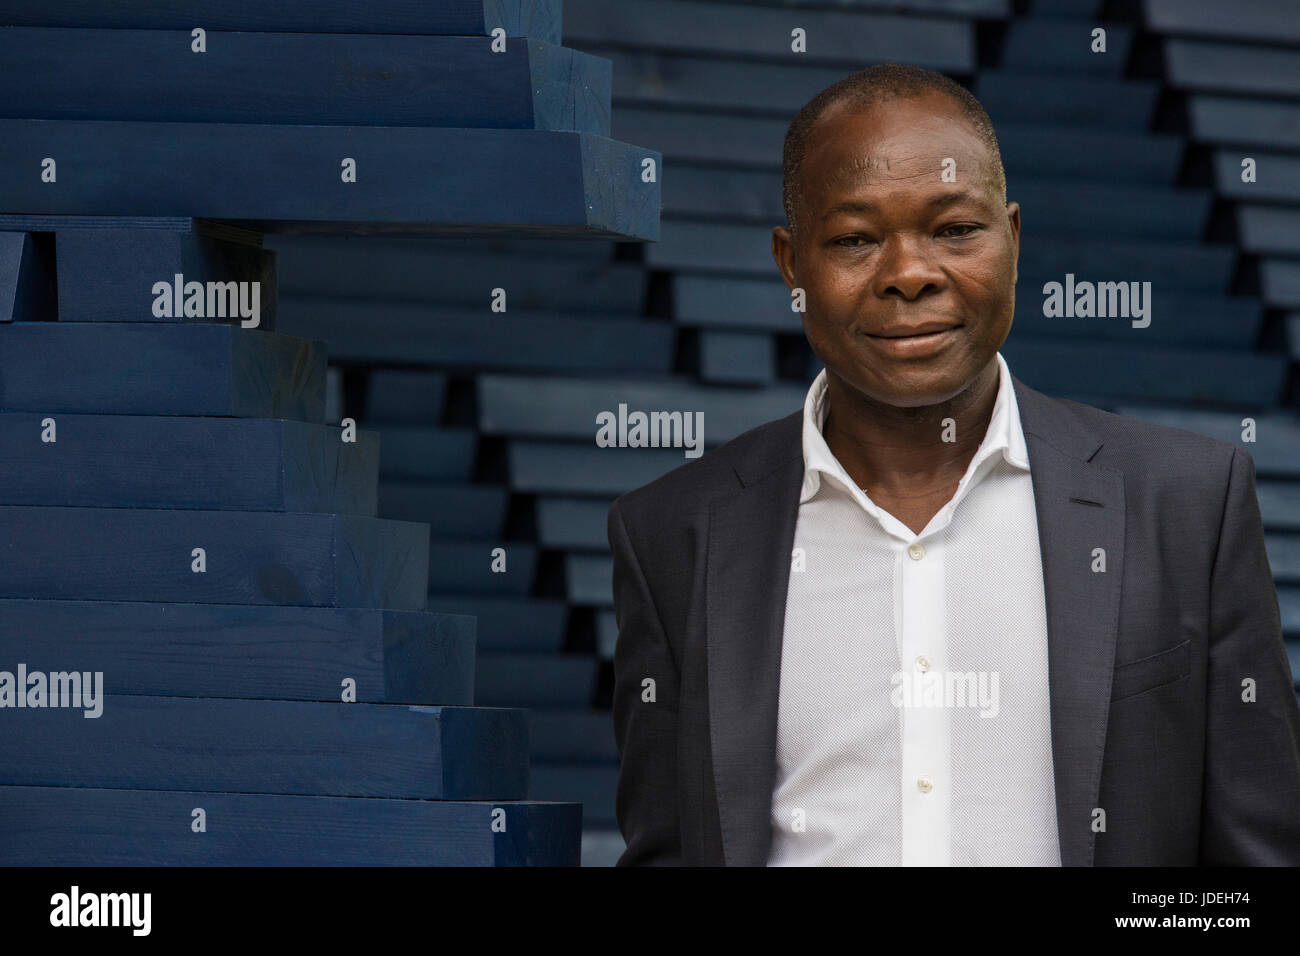 London, UK. 20 June 2017. Diebedo Francis Kere (pictured), the award-winning architect from Gando, Burkina Faso, has designed the Serpentine Pavilion 2017, next to the Serpentine Gallery in Kensington Gardens. Kere leads the Berlin-based practice Kere Architecture. He is the 17th architect to accept the Serpentine Gallery's invitation to design a temporary Pavilion in its grounds. The Pavilion is open to the public from 23 June to 8 October 2017. Stock Photo